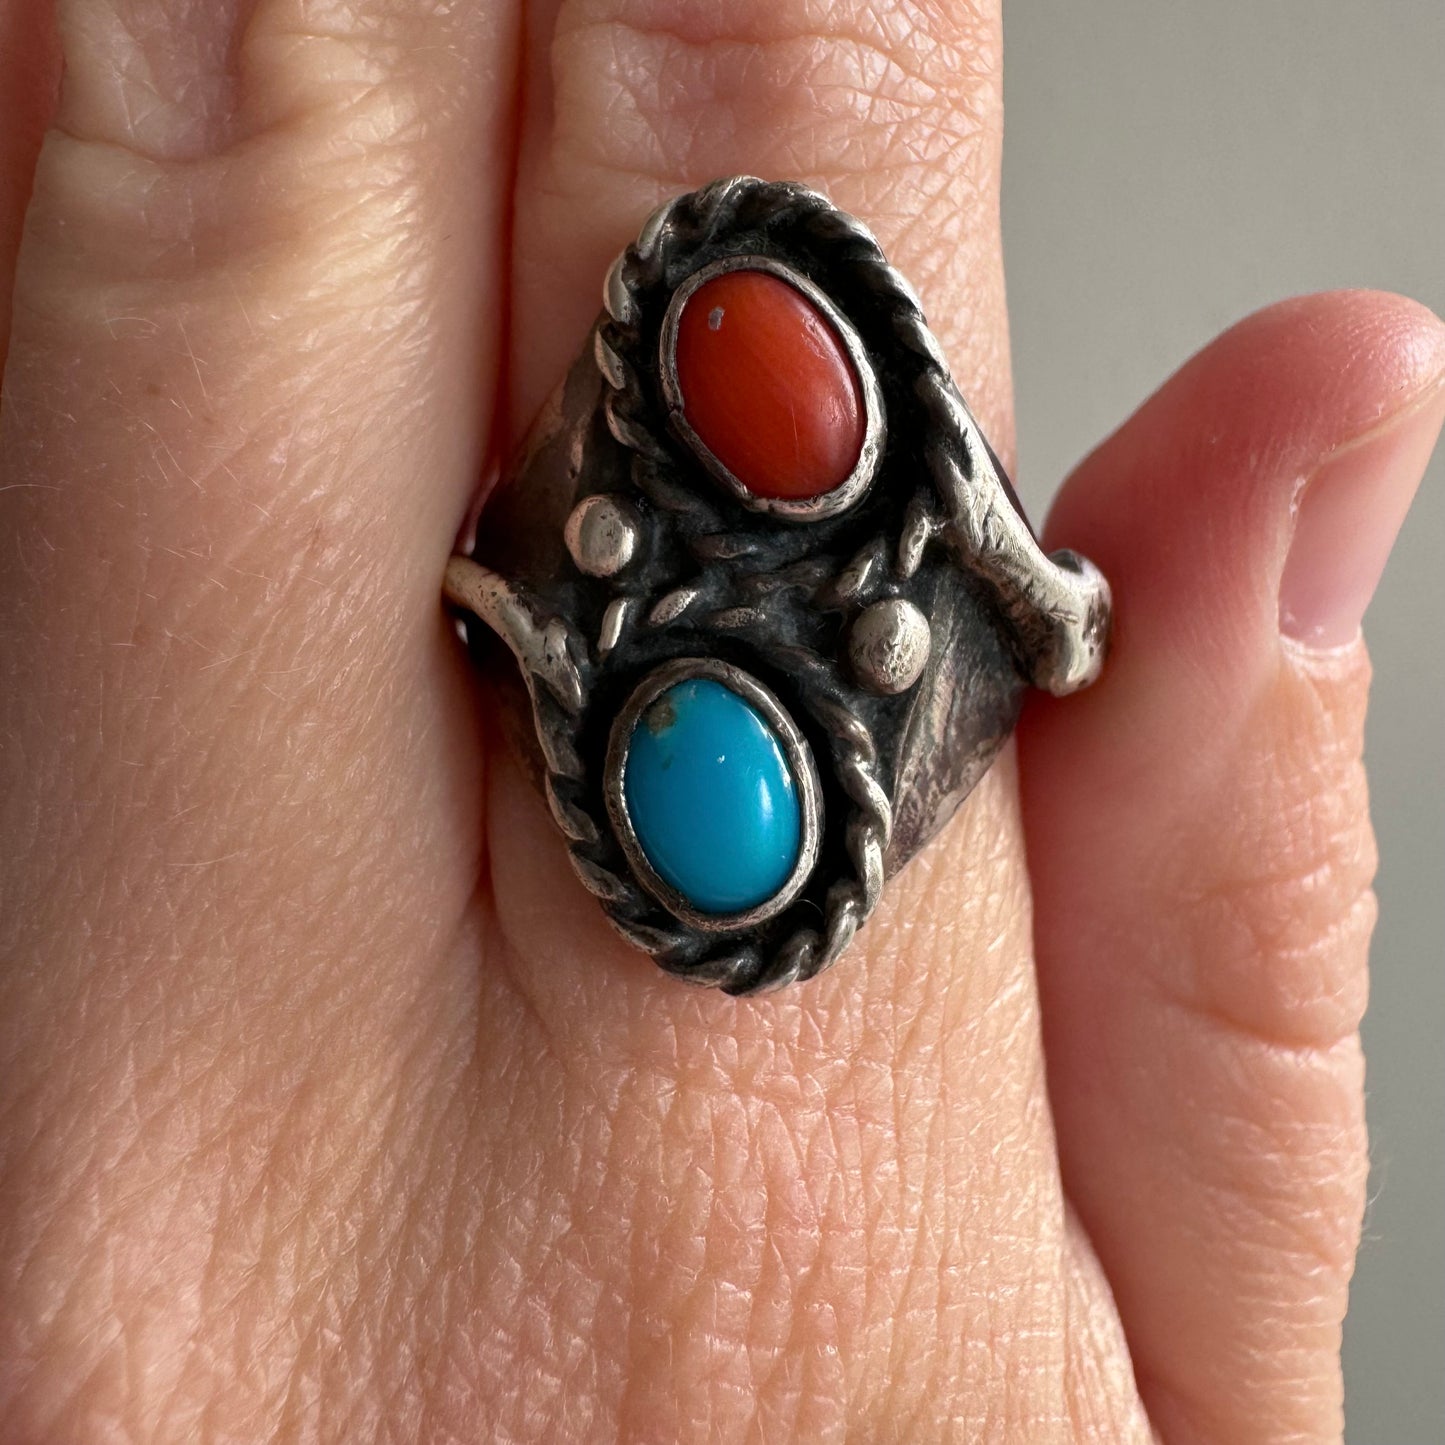 V I N T A G E // secret snake / sterling silver turquoise and coral ring with a sneaky snake / size 9.75